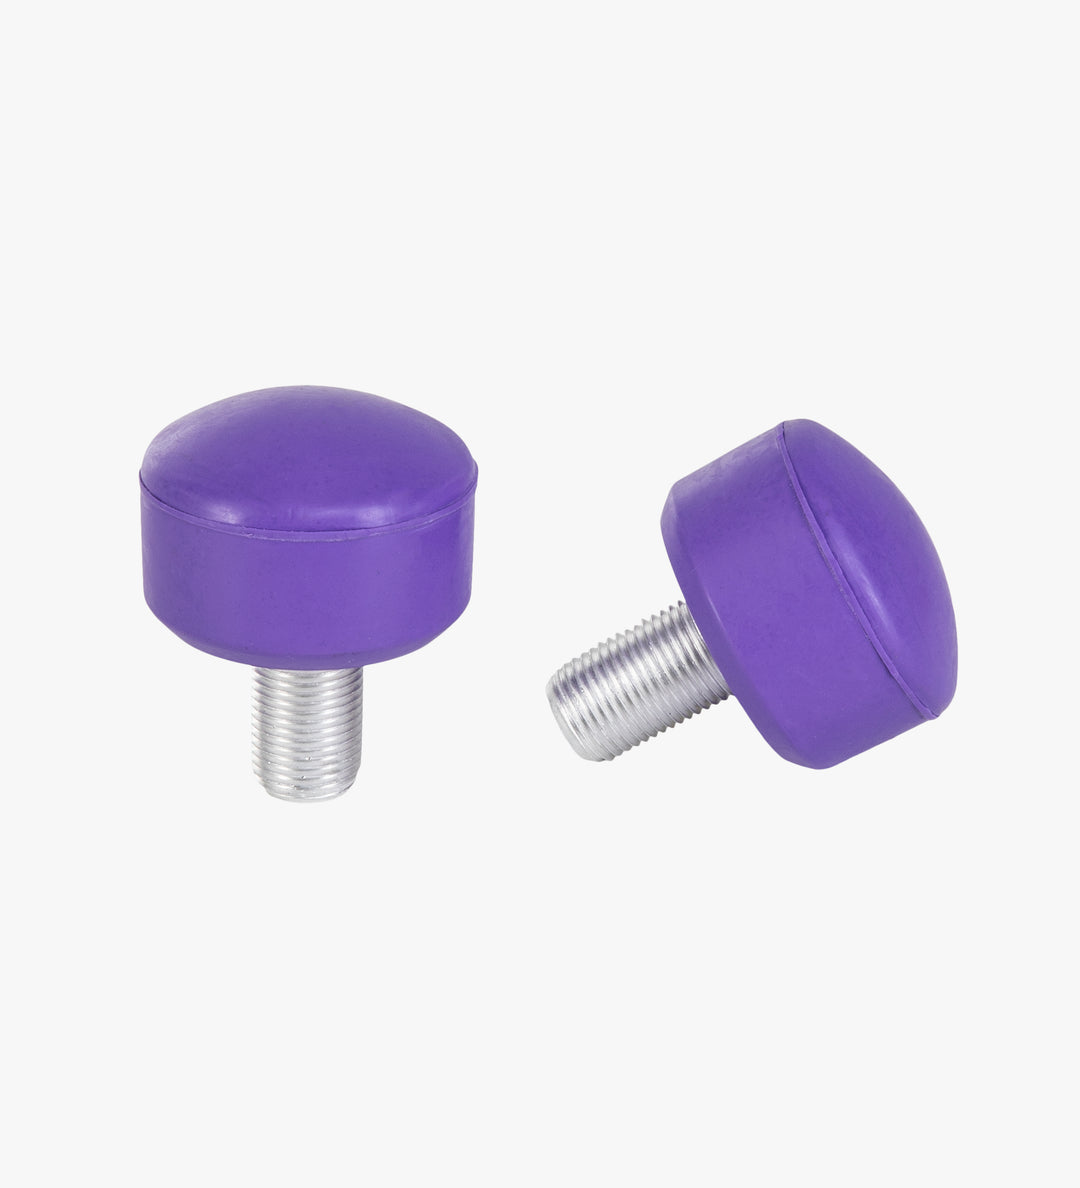 Violet Purple Adjustable C7 roller skate stoppers made from durable rubber and measure 47 by 35 mm. 